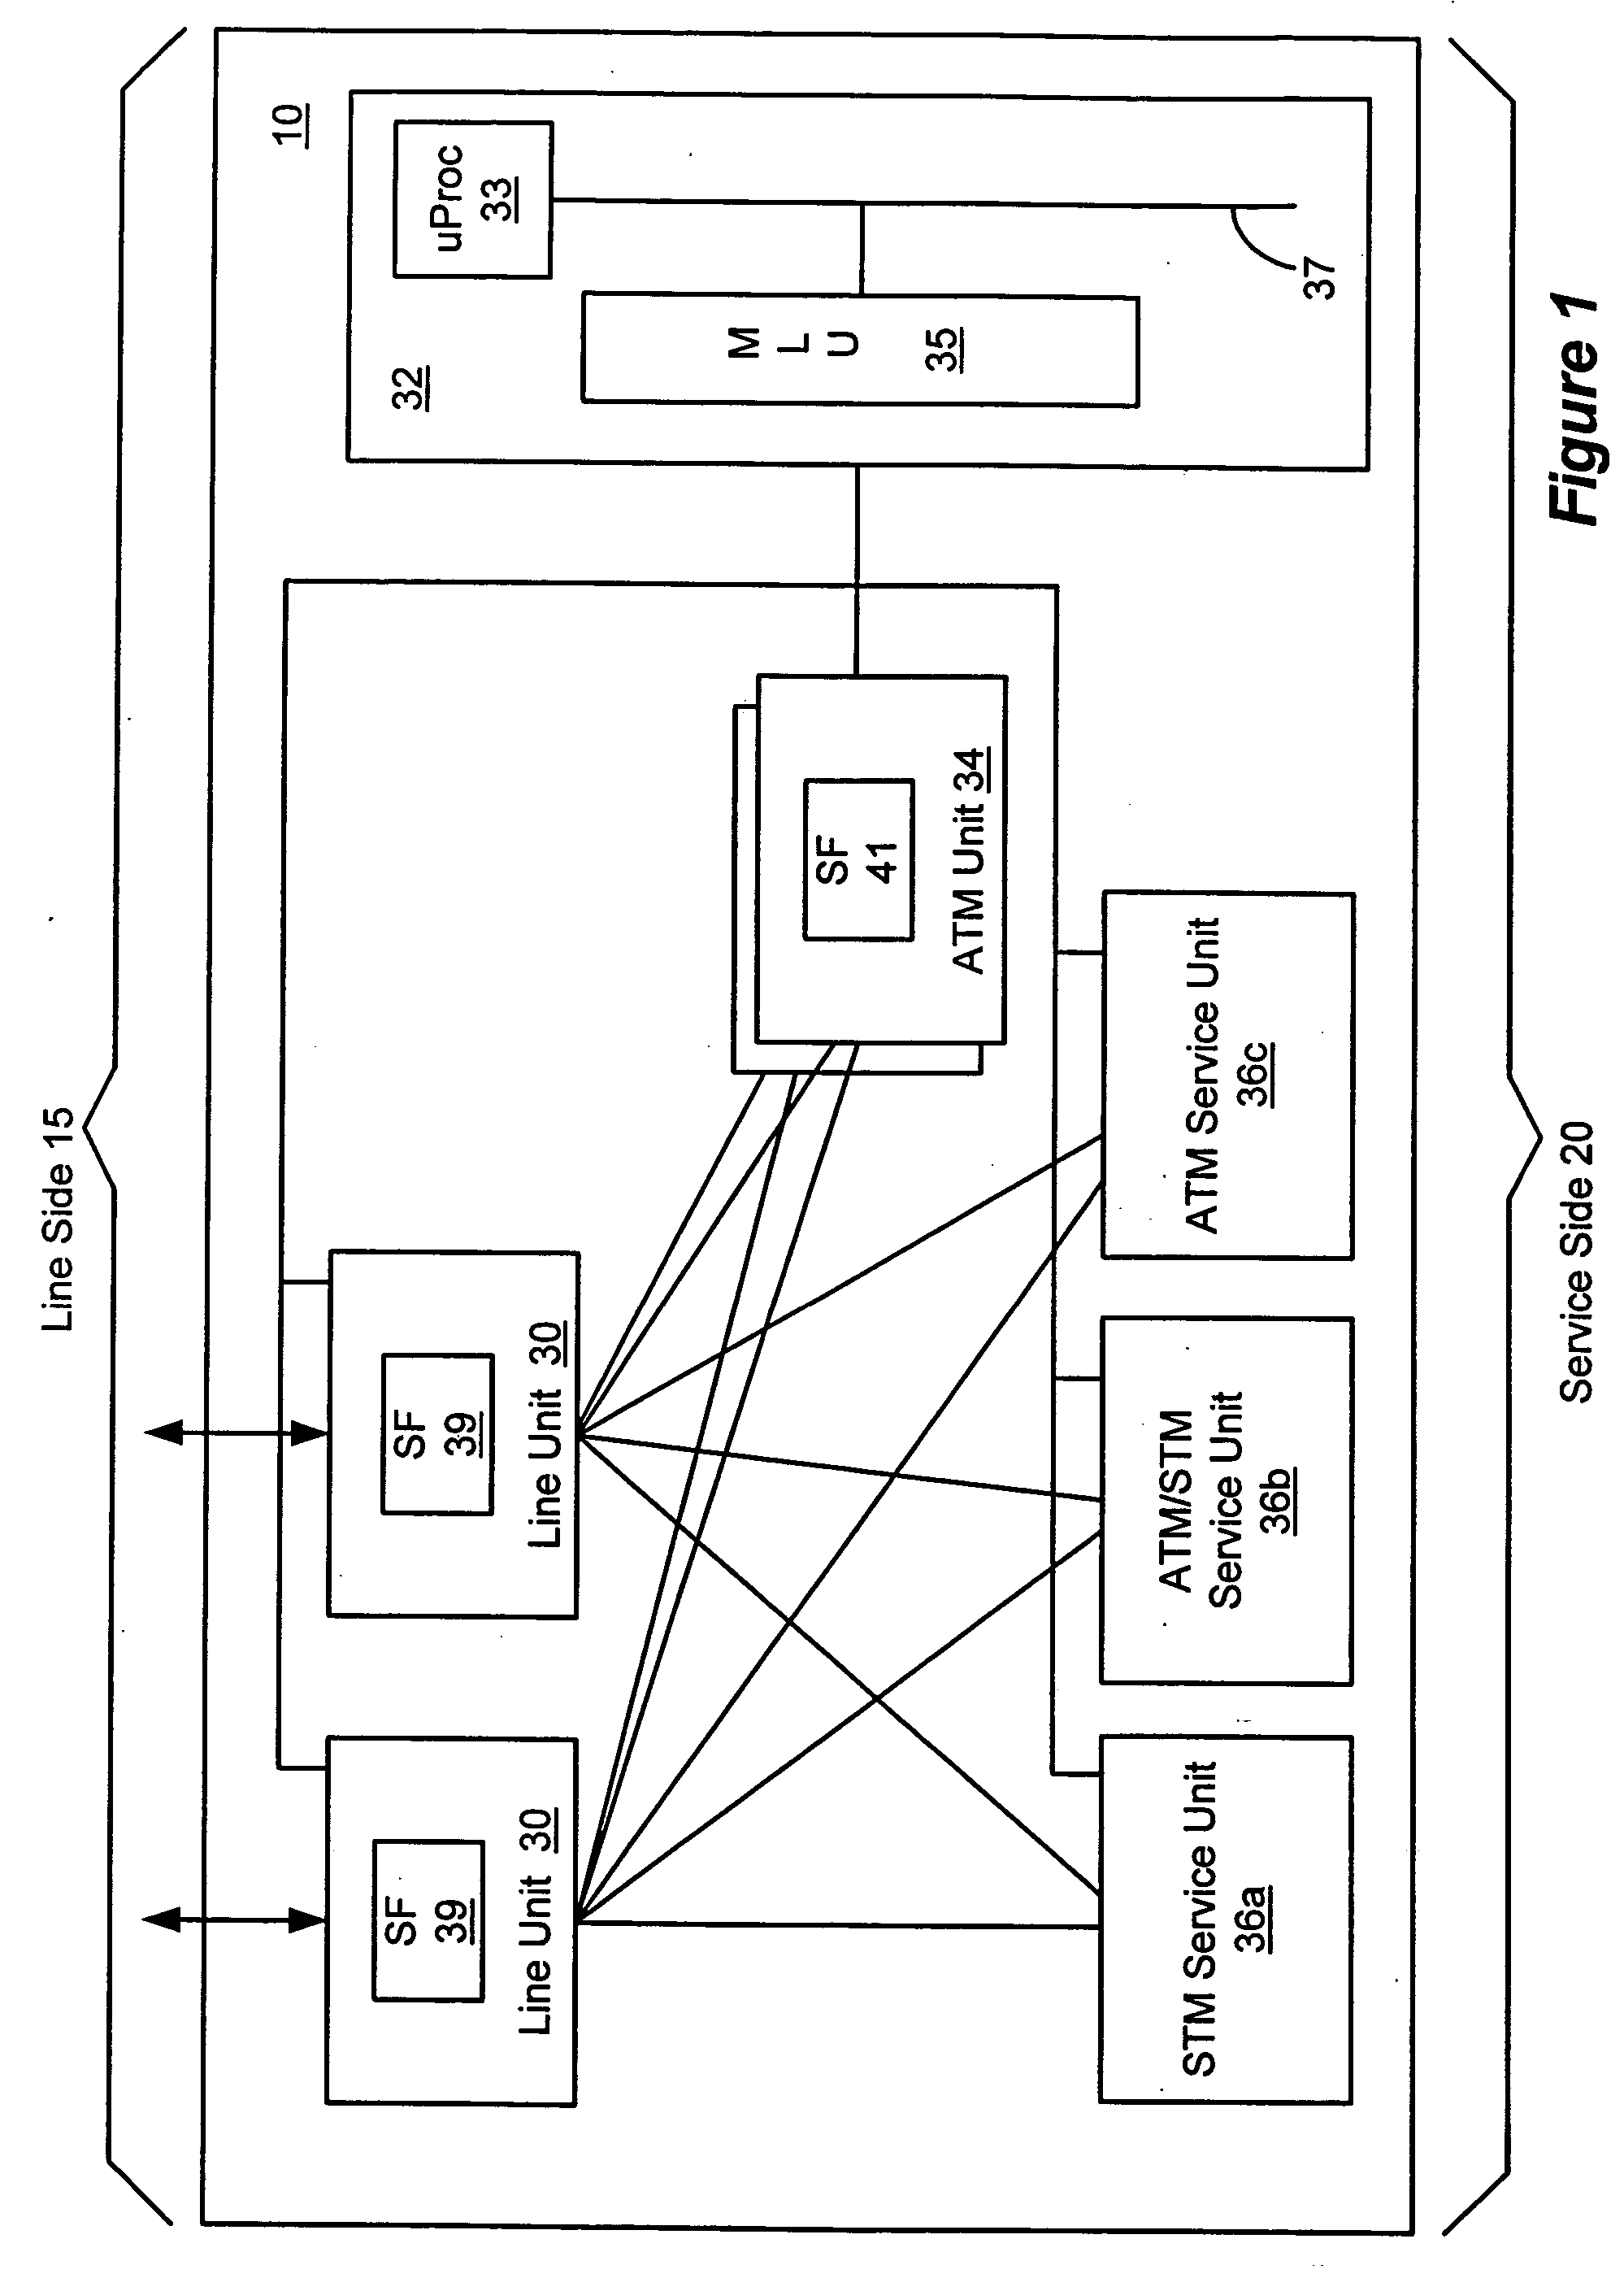 Architecture for a hybrid STM/ATM add-drop multiplexer